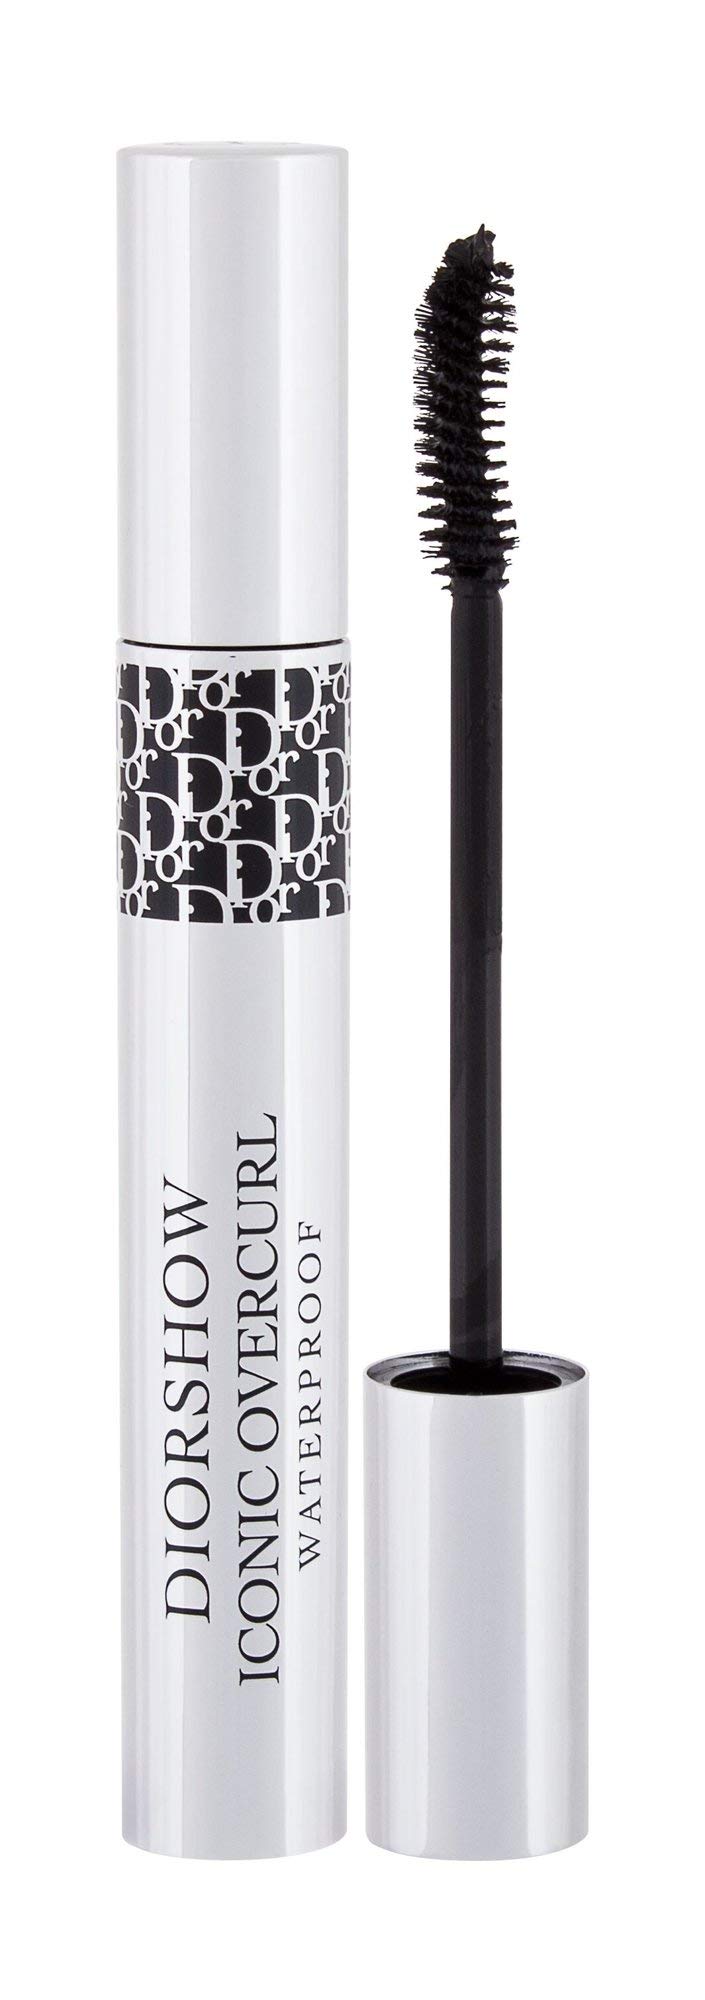 24H (091) Spectacular Overcurl Mascara Diorshow Iconic Ounce 0.21 Black Waterproof Dior